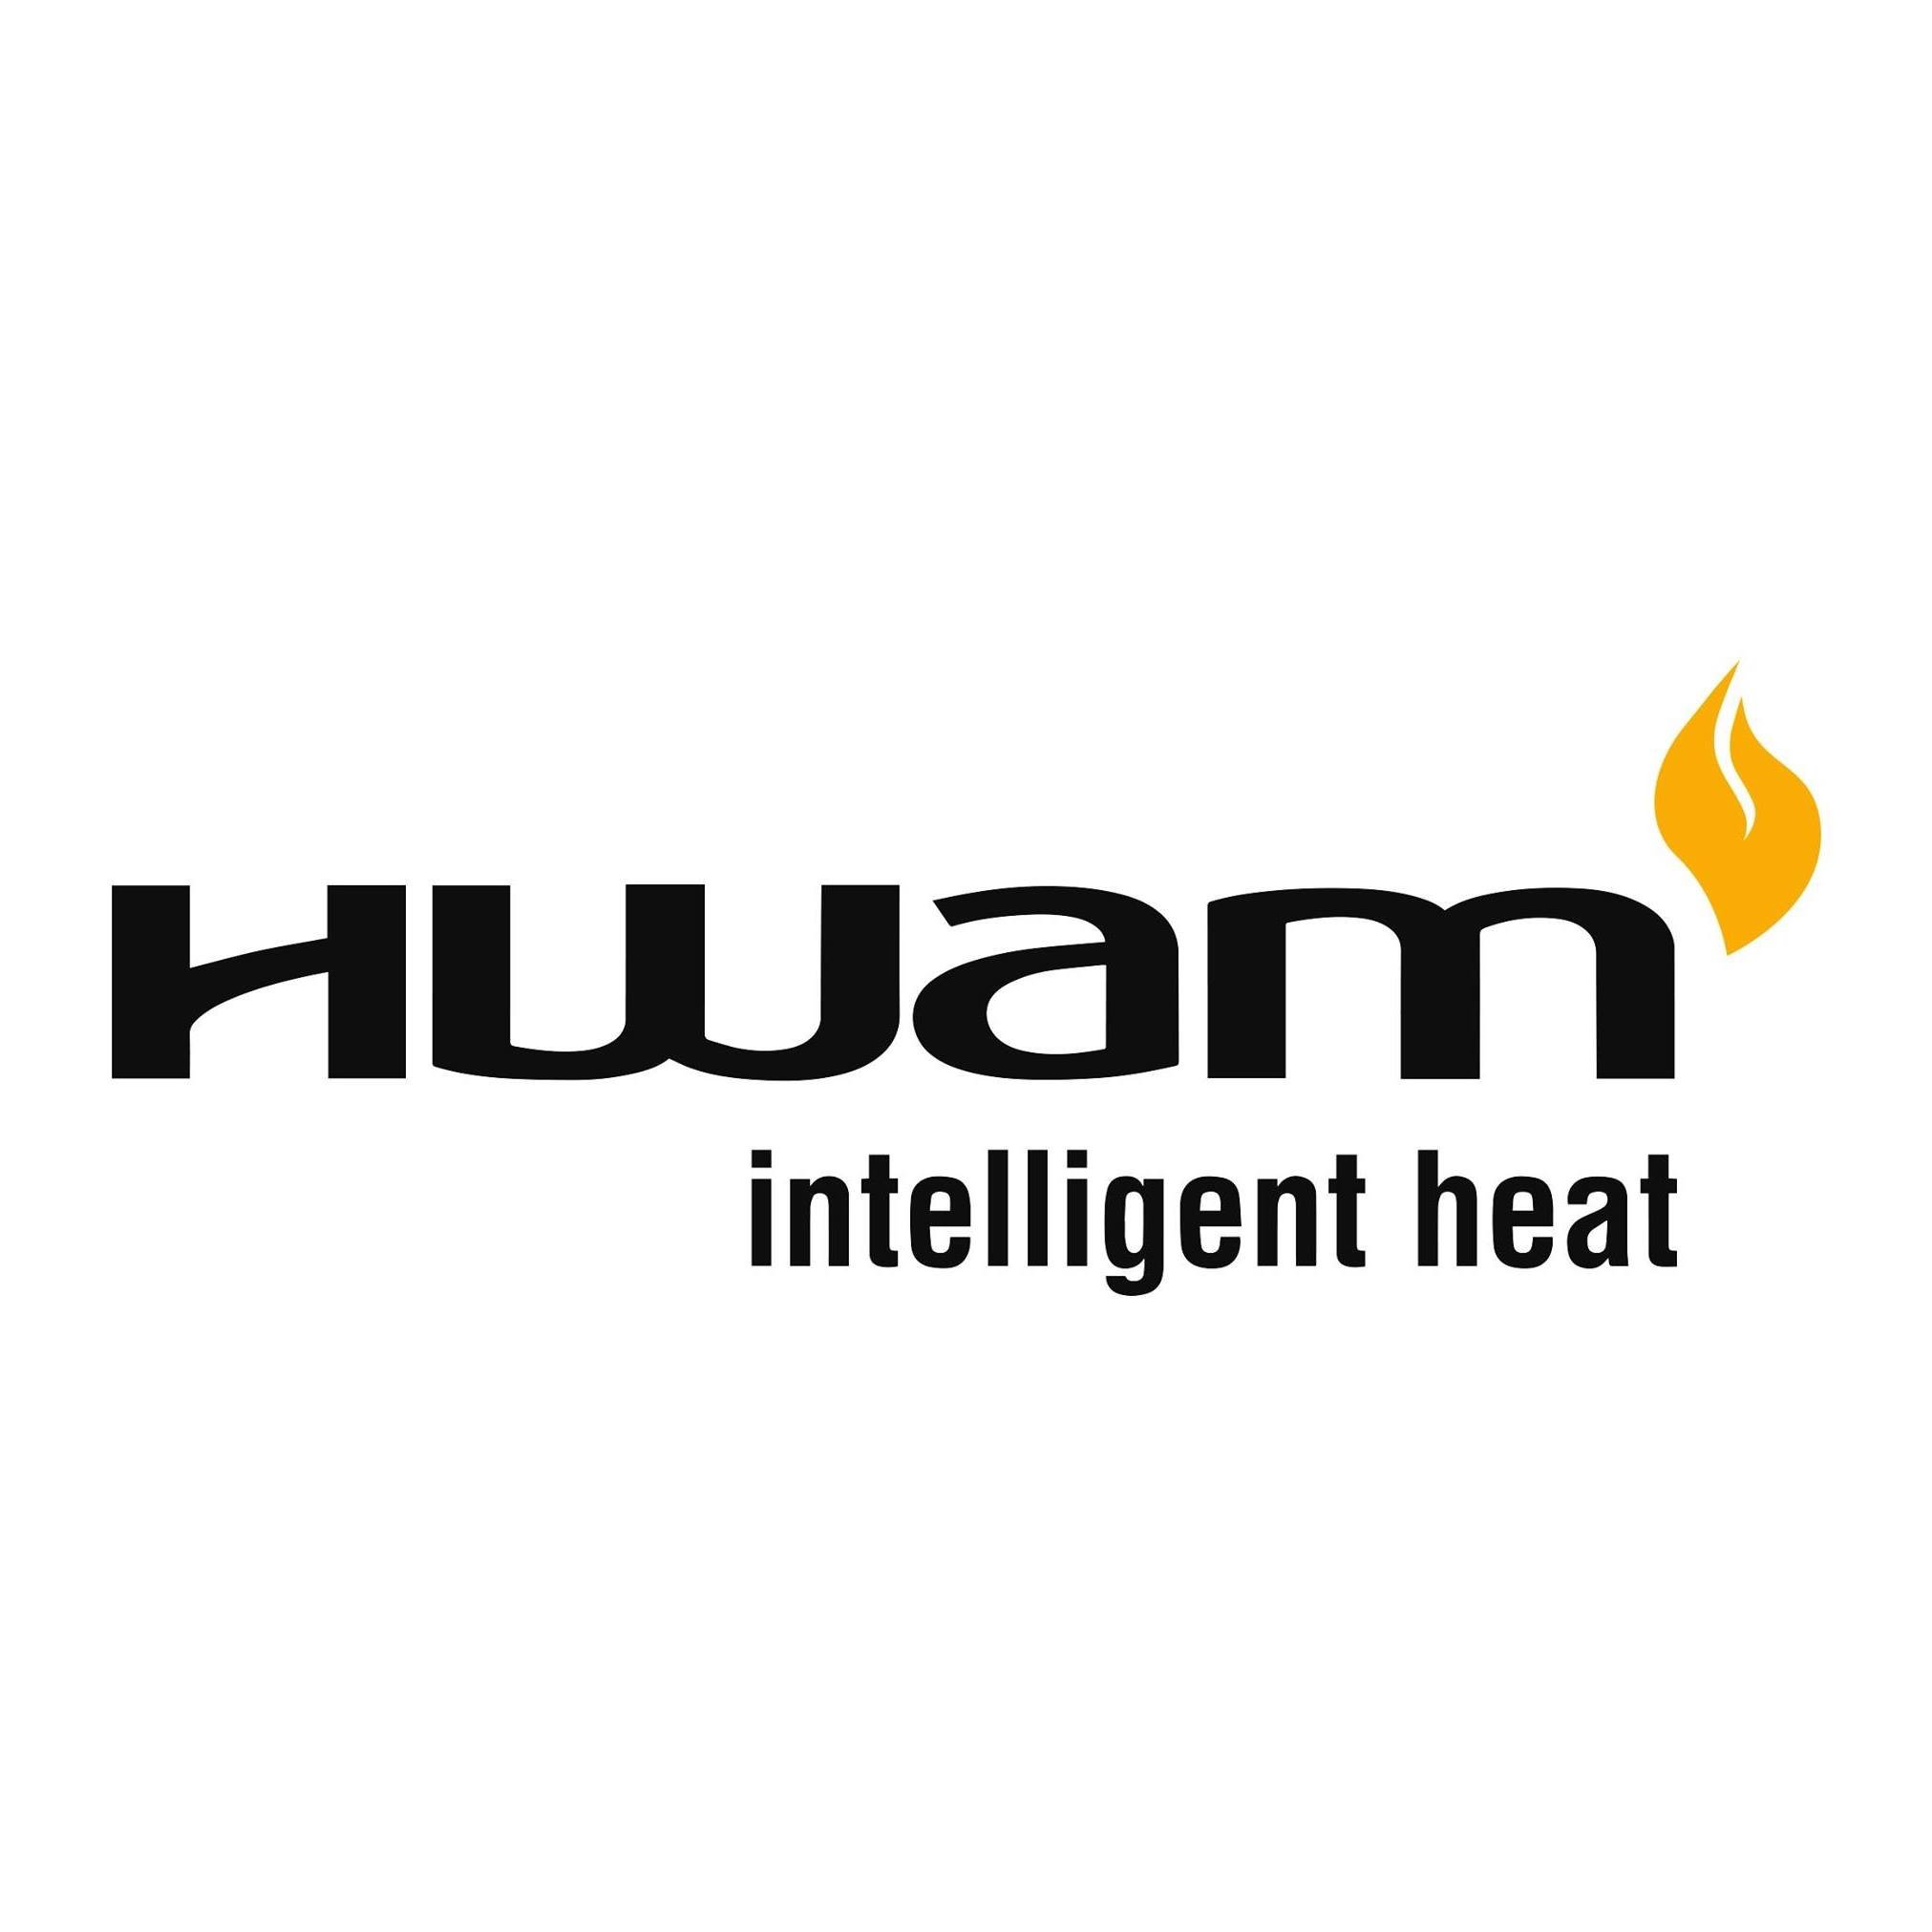 HWAM A/S is one of Denmark's largest producers of architect-designed wood-burning stoves.